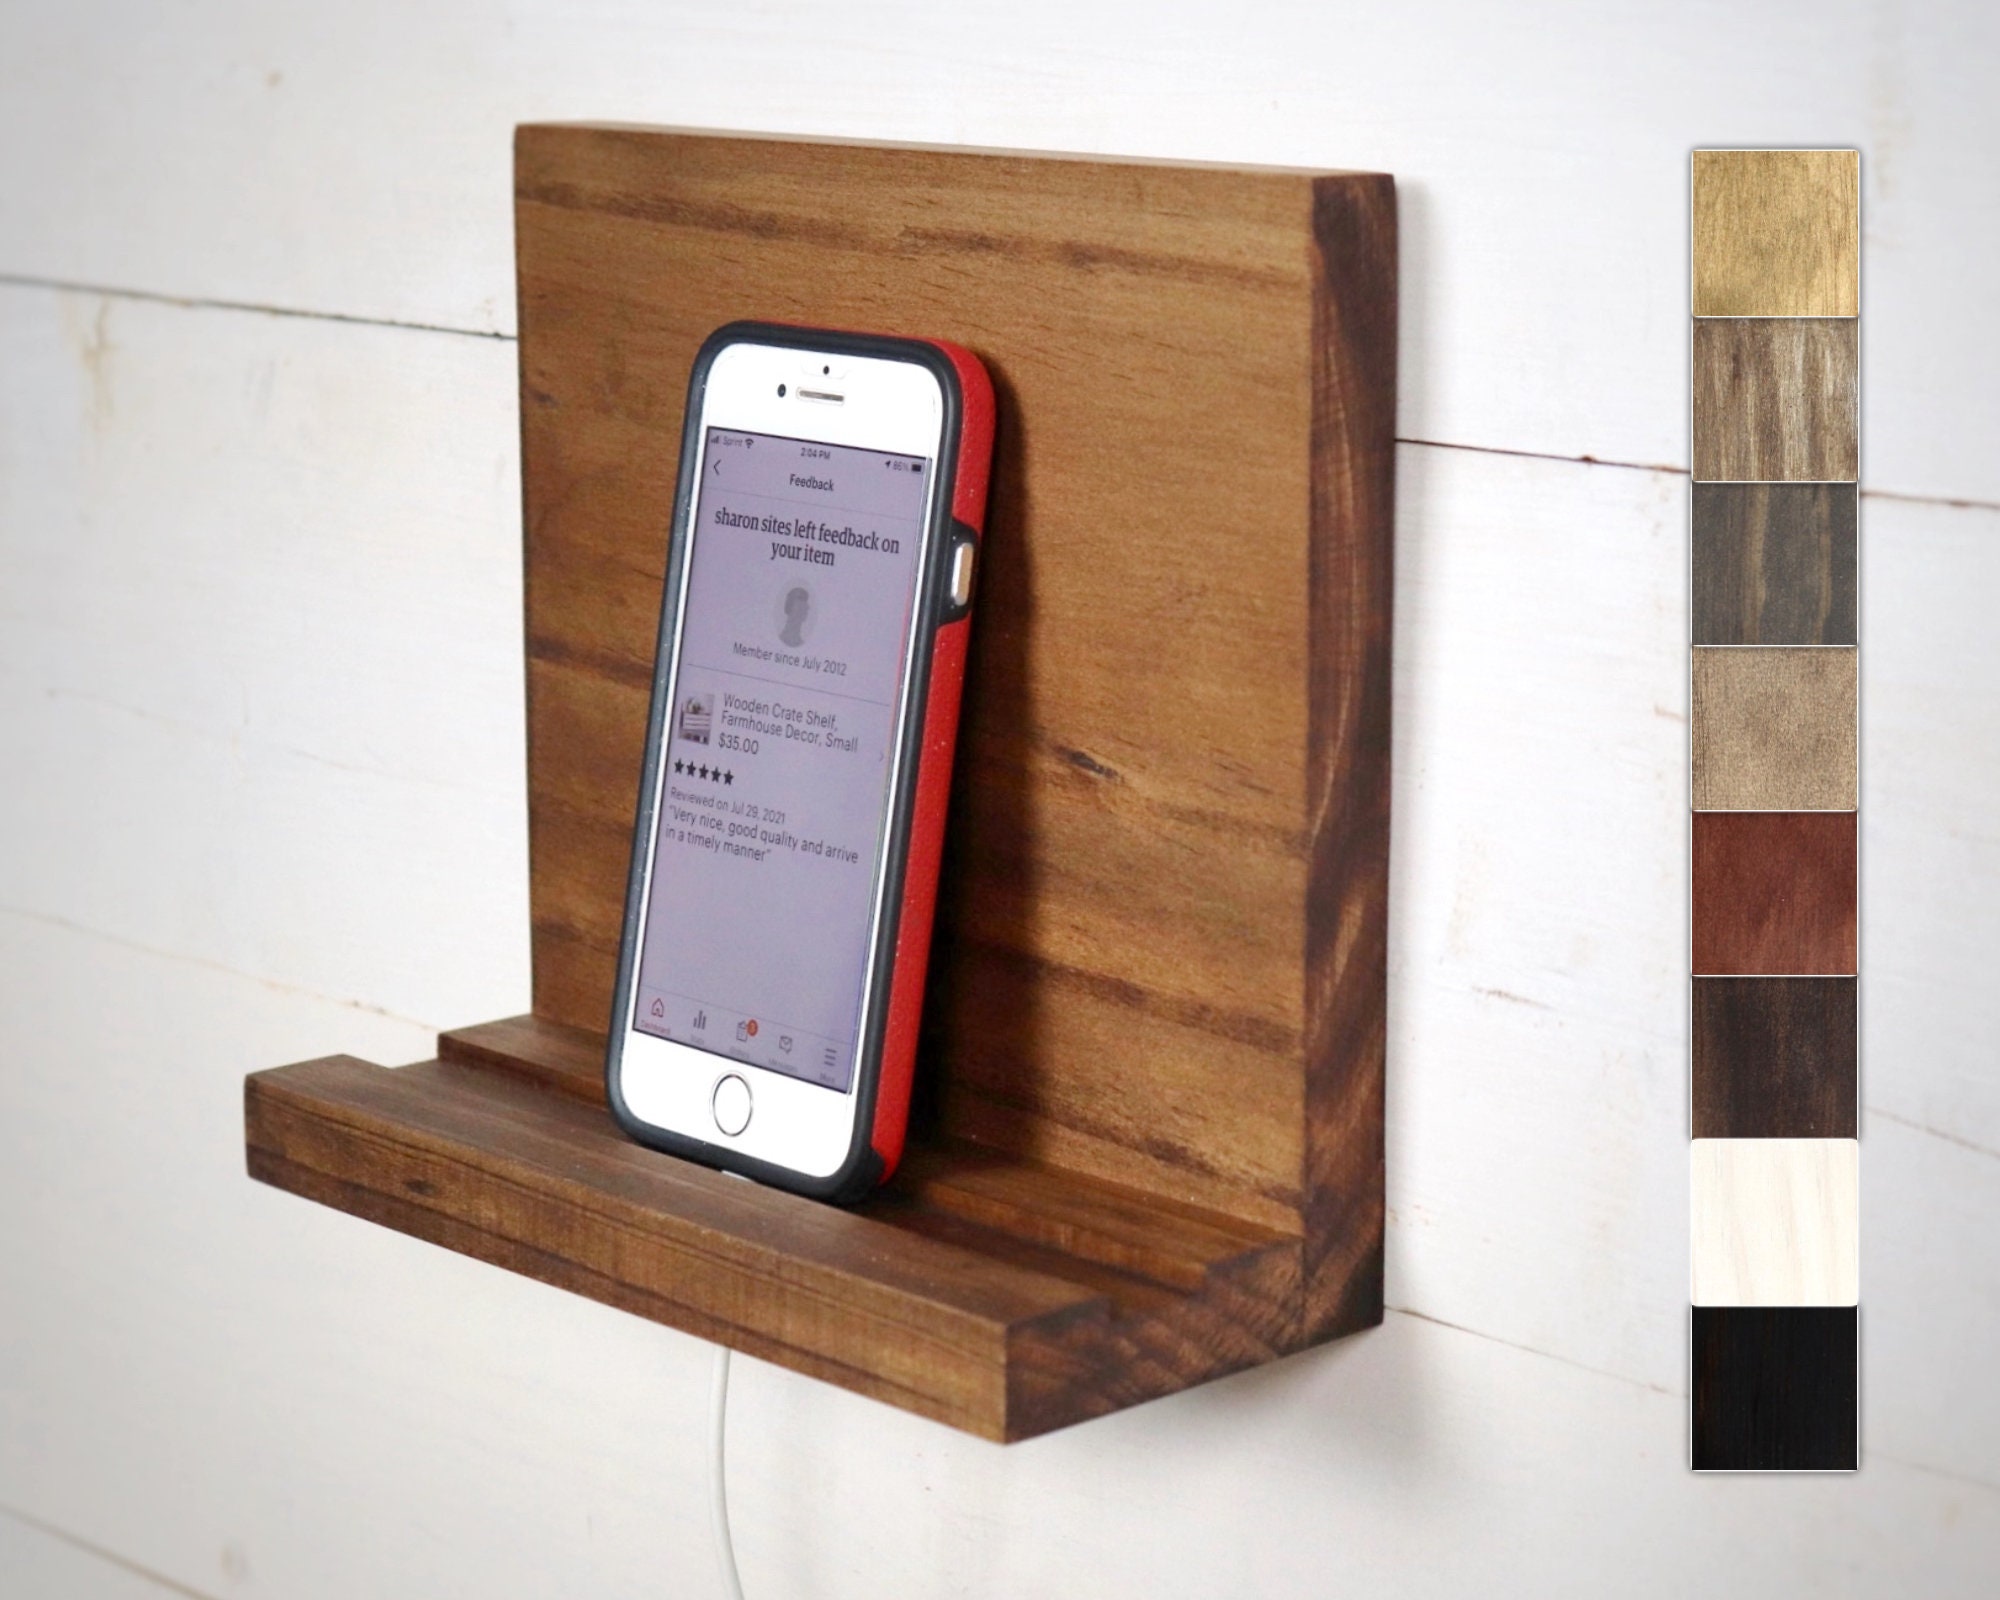 DIY Cell Phone Stand and Accessory Holder - Tidbits